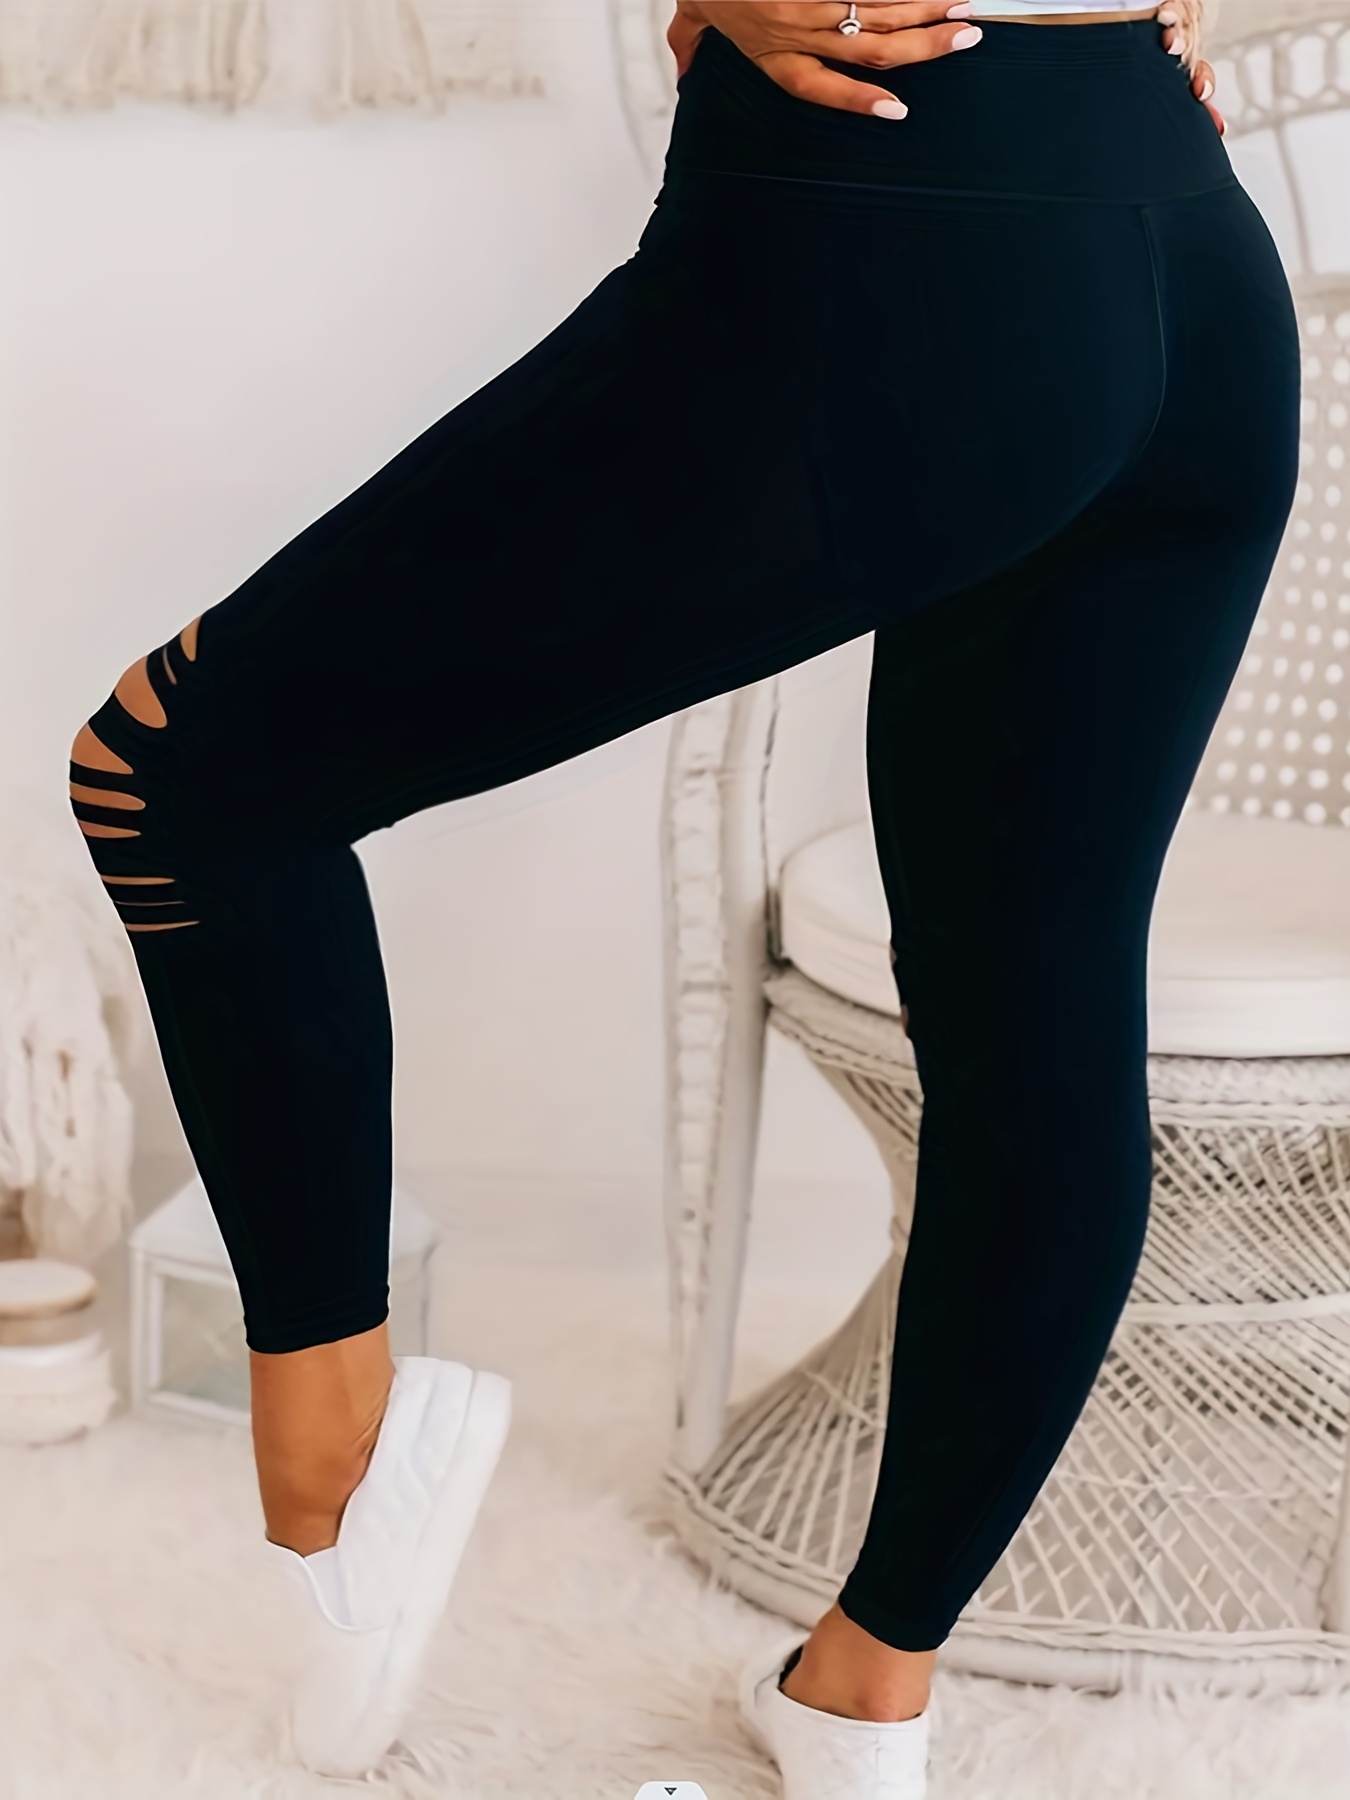 Stretchy Plus Size Ripped Leggings at Rs 2150.00, Cotton Lycra Leggings